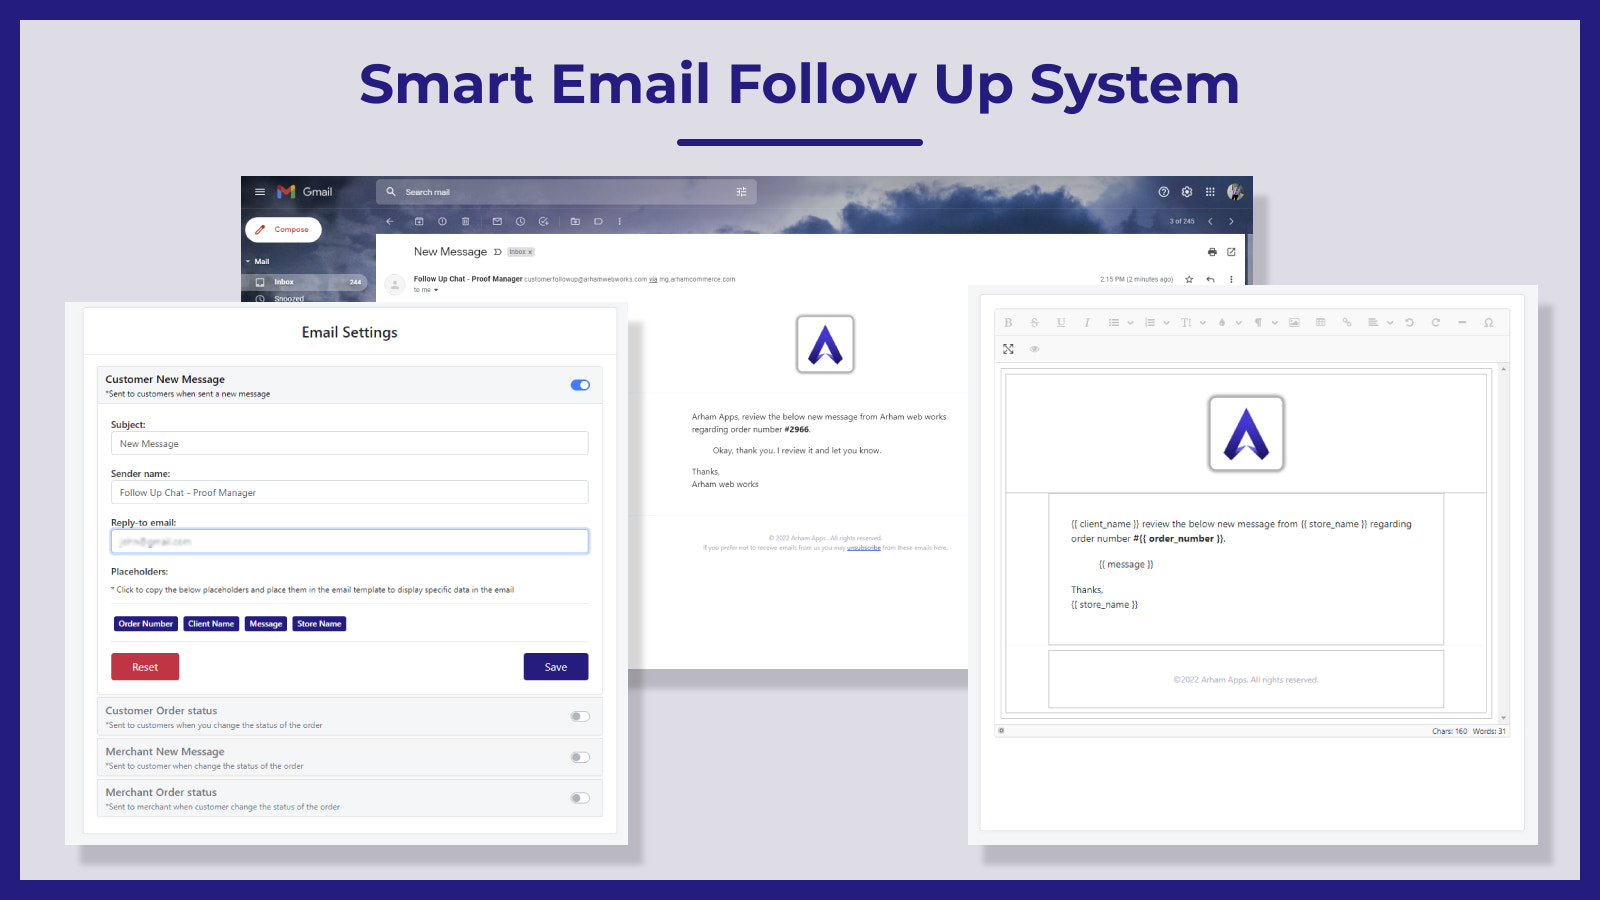 Smart Email Follow Up System